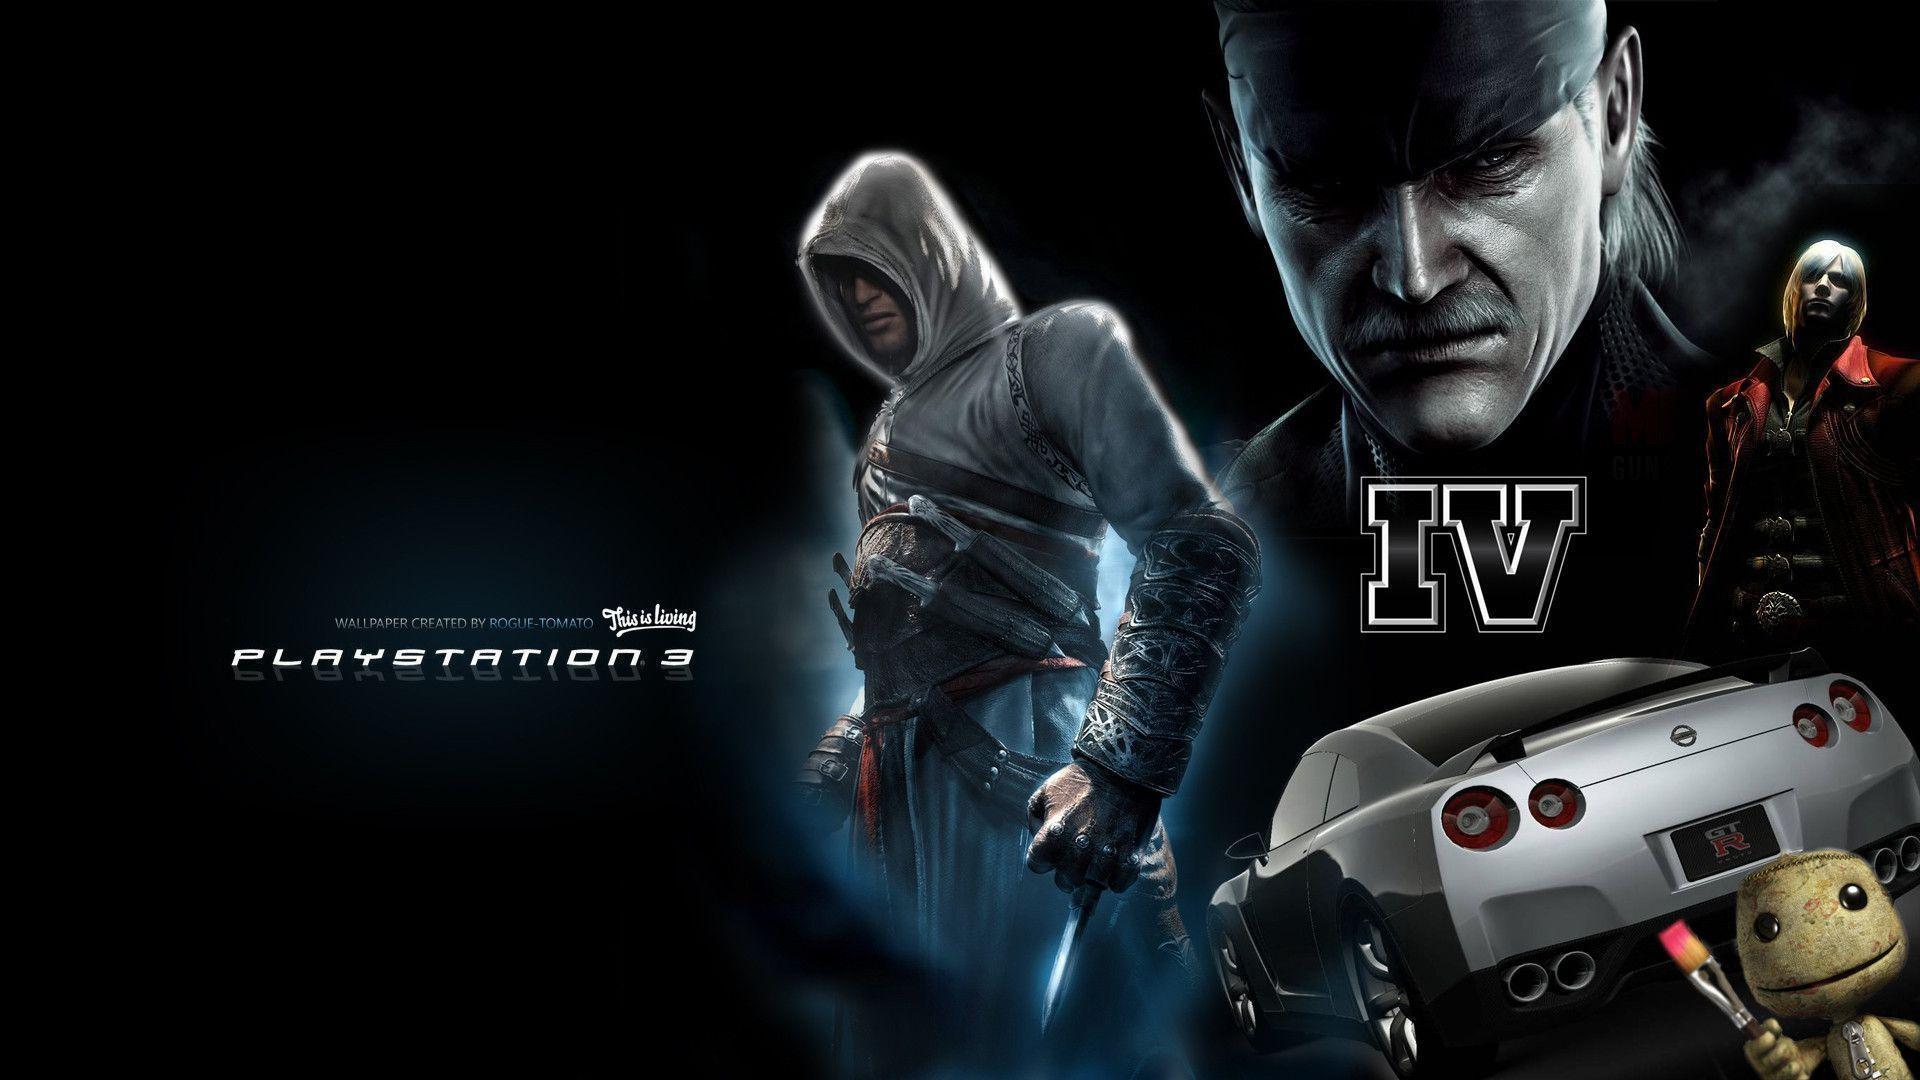 image For > Cool Ps3 Wallpaper